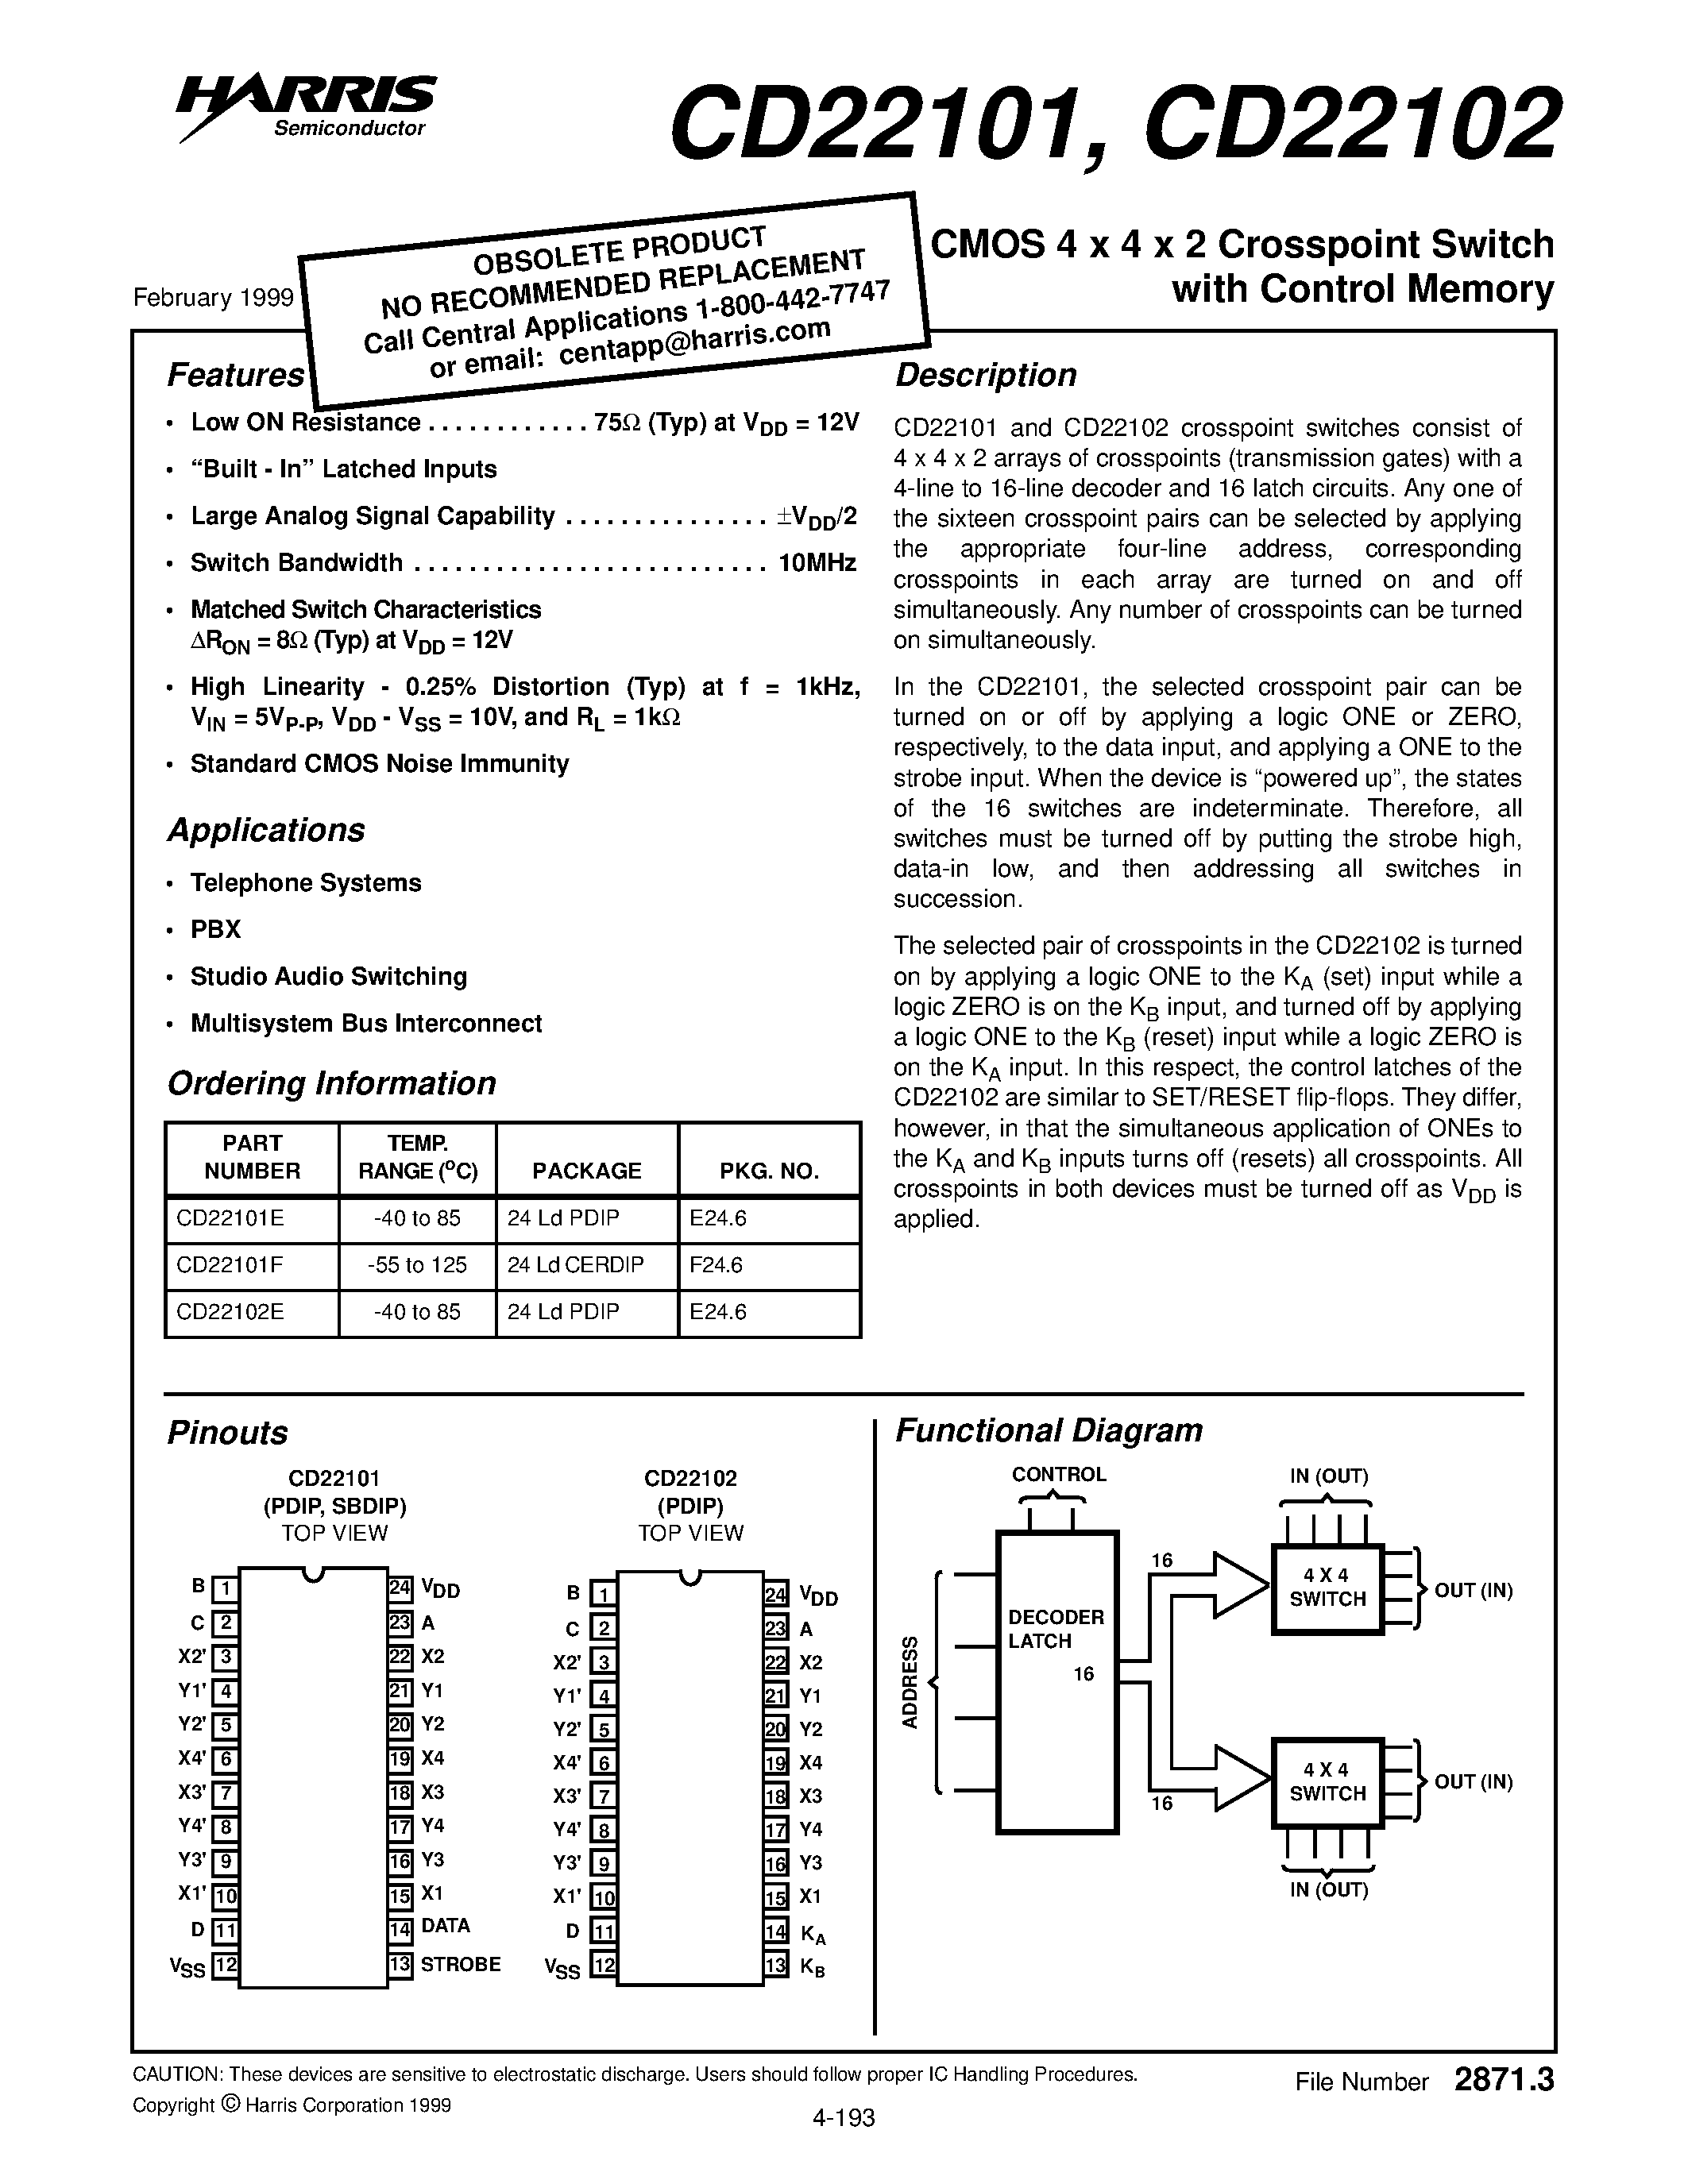 Datasheet CD22101 - CMOS 4 x 4 x 2 Crosspoint Switch with Control Memory page 1